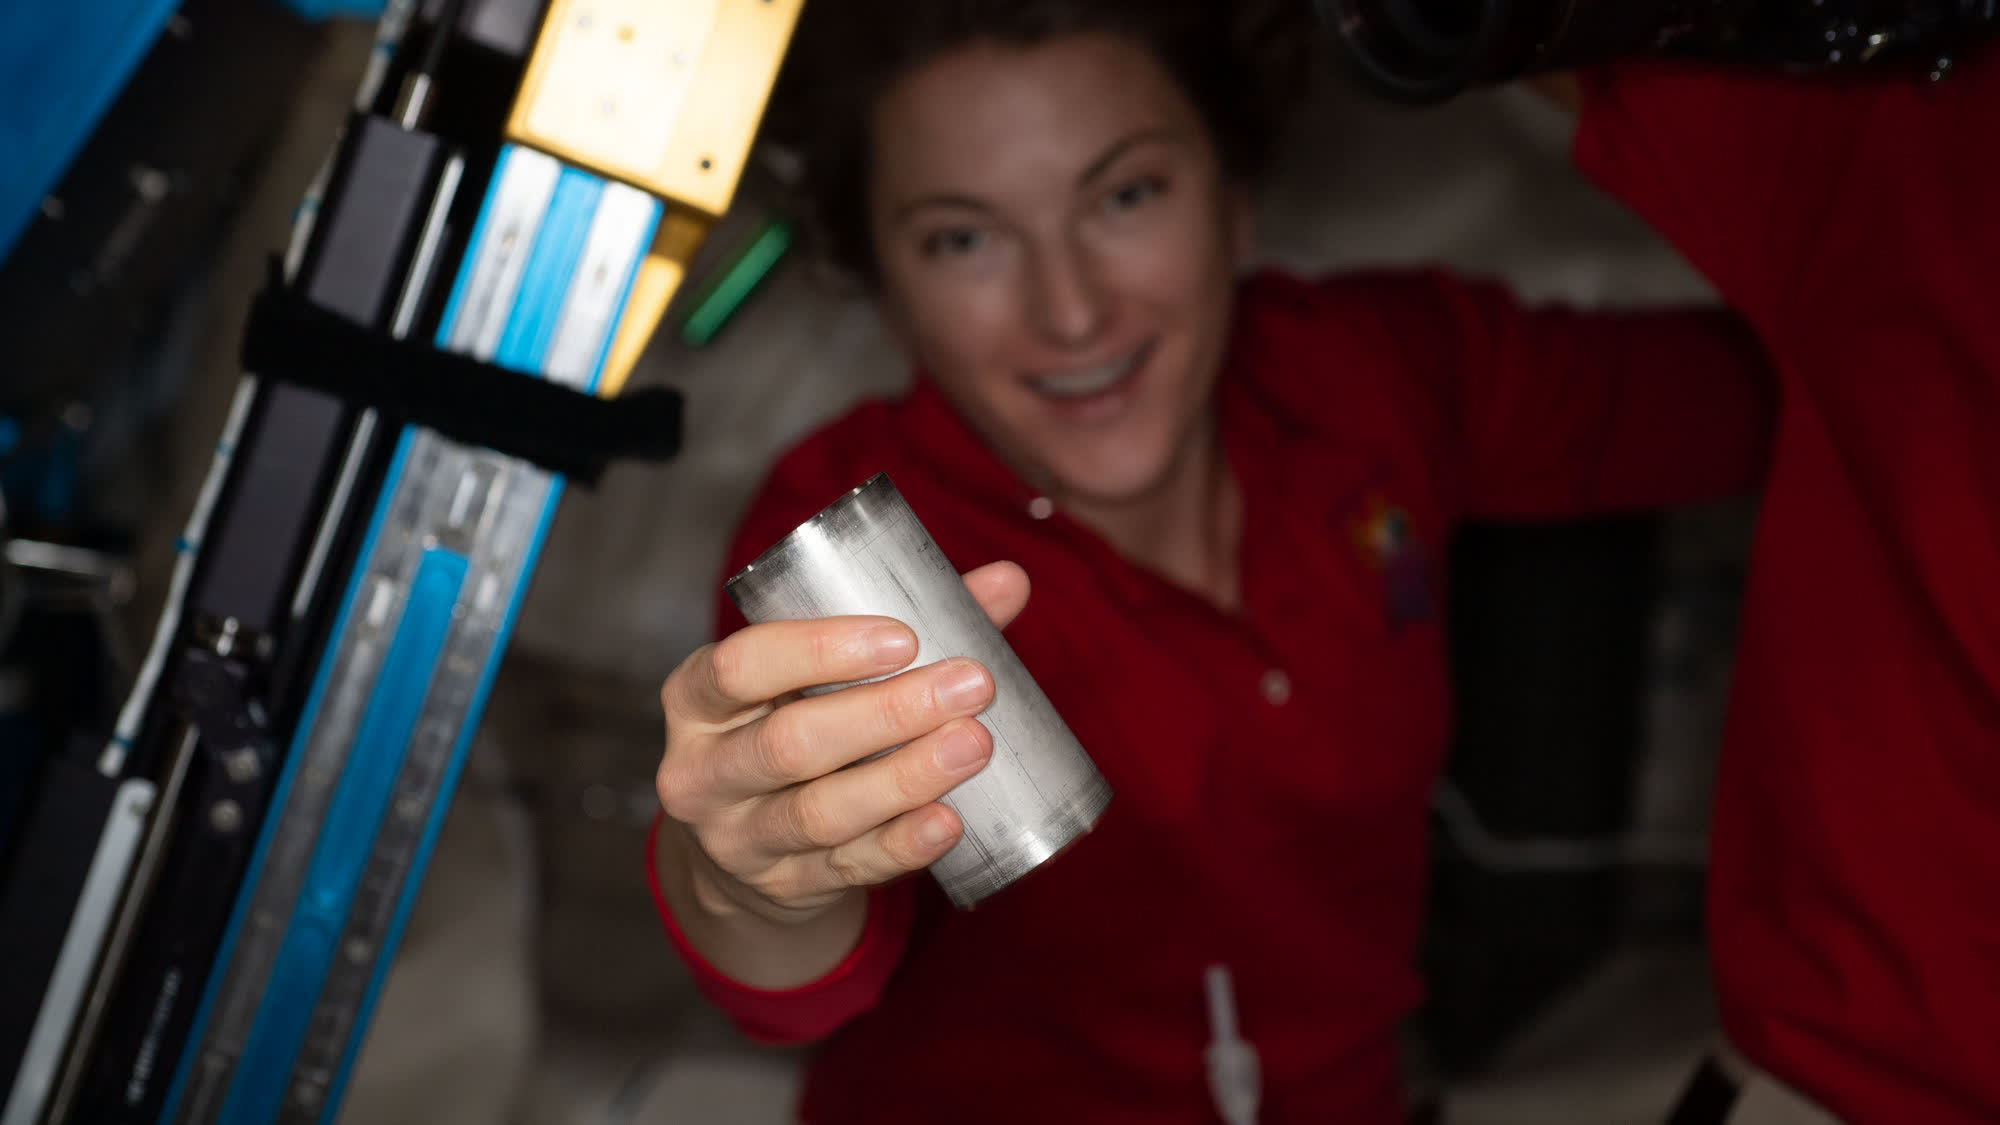 NASA astronauts on the ISS are turning 98% of their sweat and urine into drinkable water